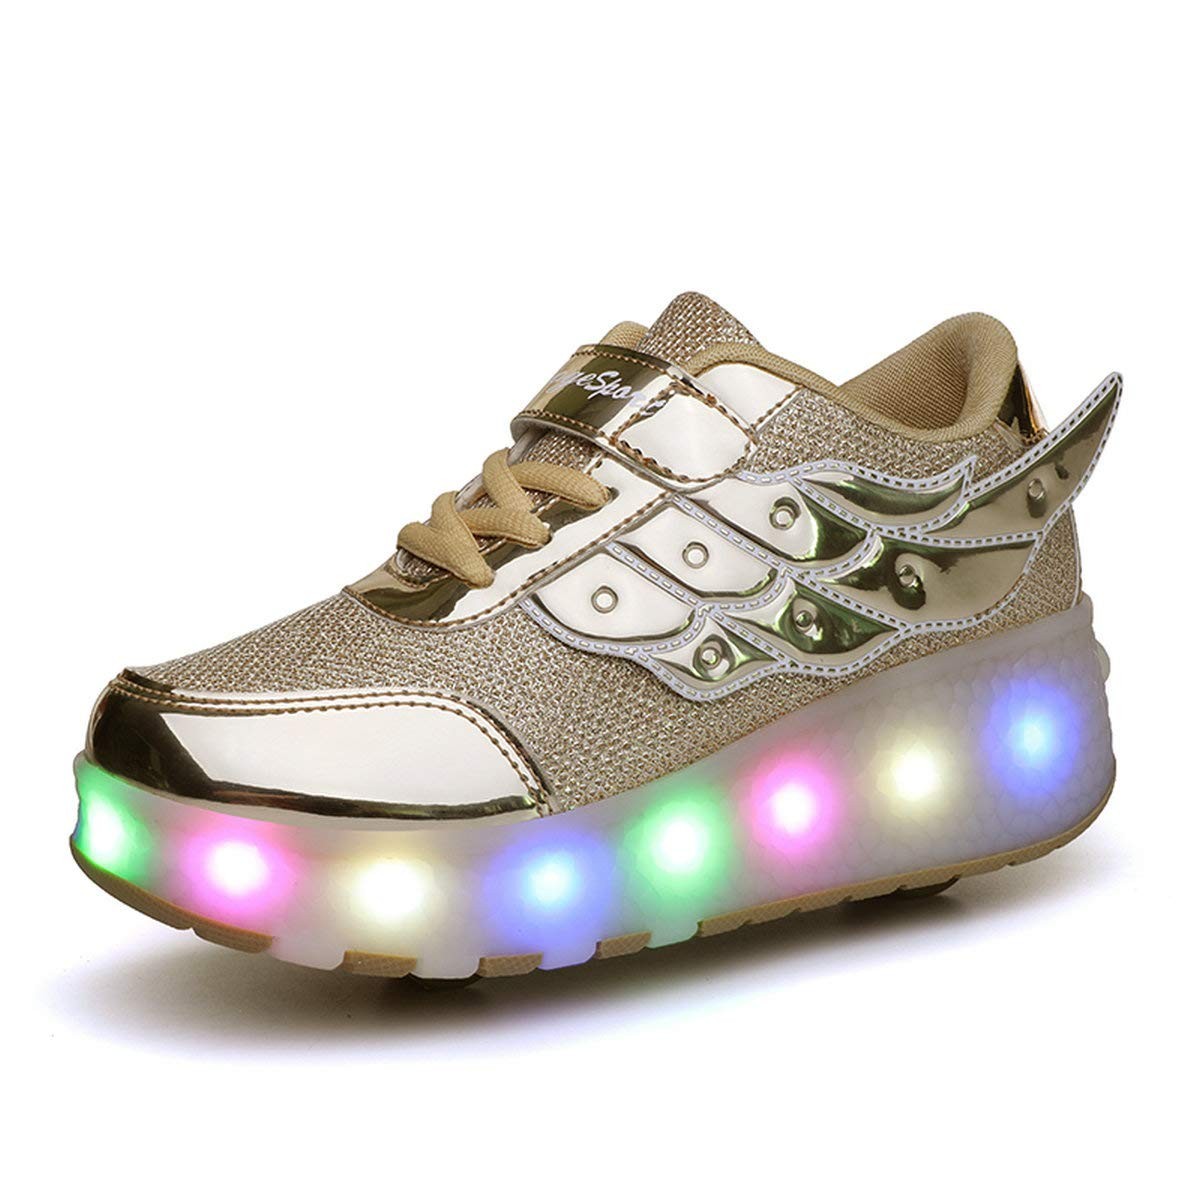 Boys Girls Light up Roller Shoes with 2 Wheels Skate Sneakers for Kids Youth